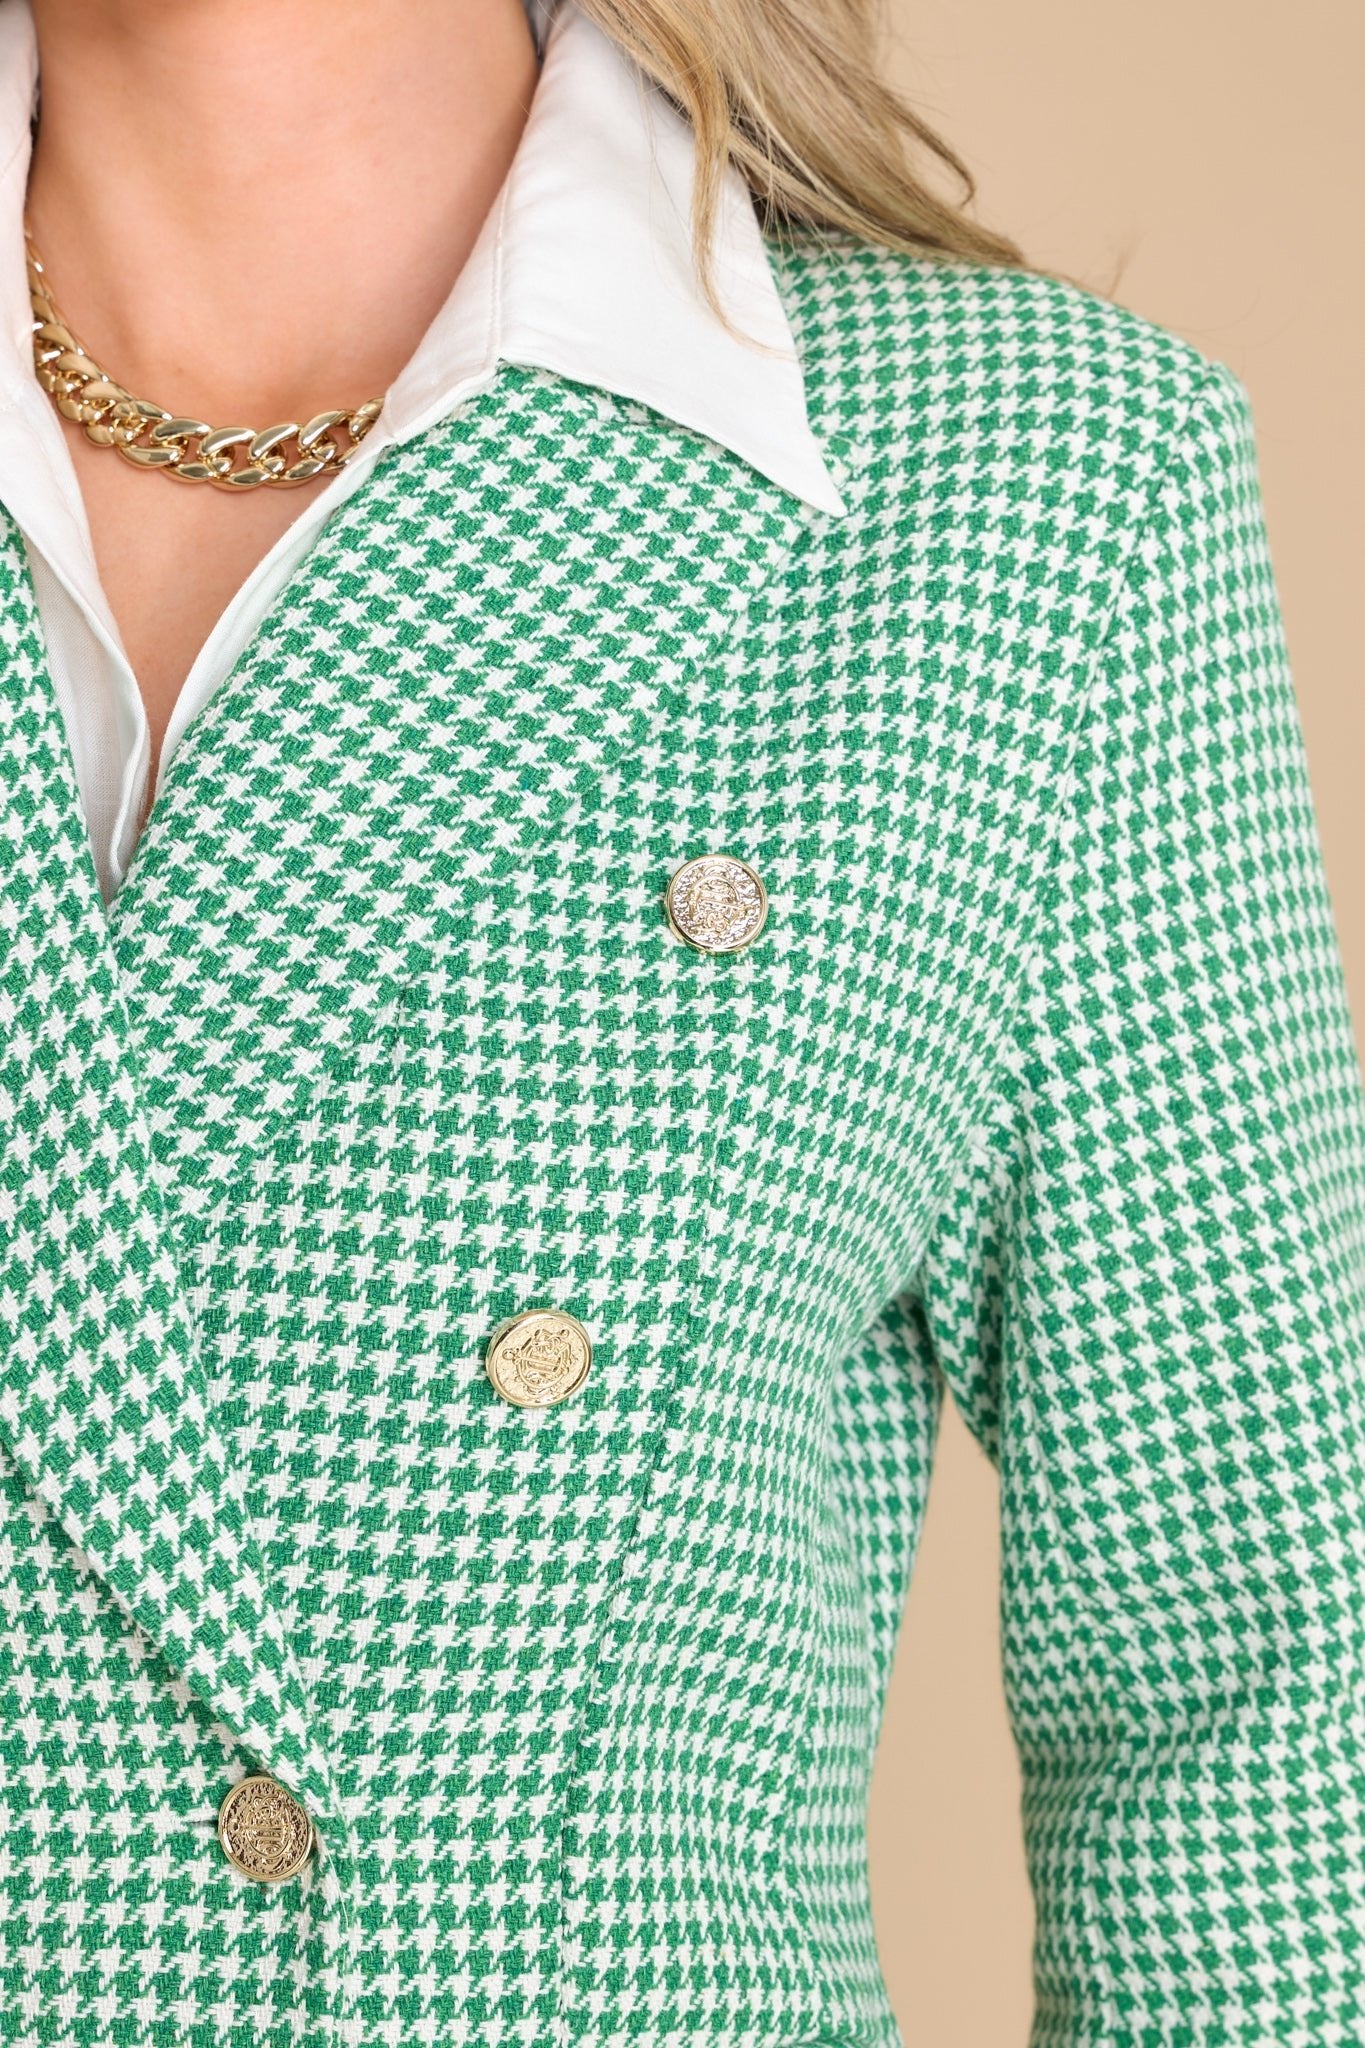 Official Slay Green Houndstooth Blazer - Red Dress